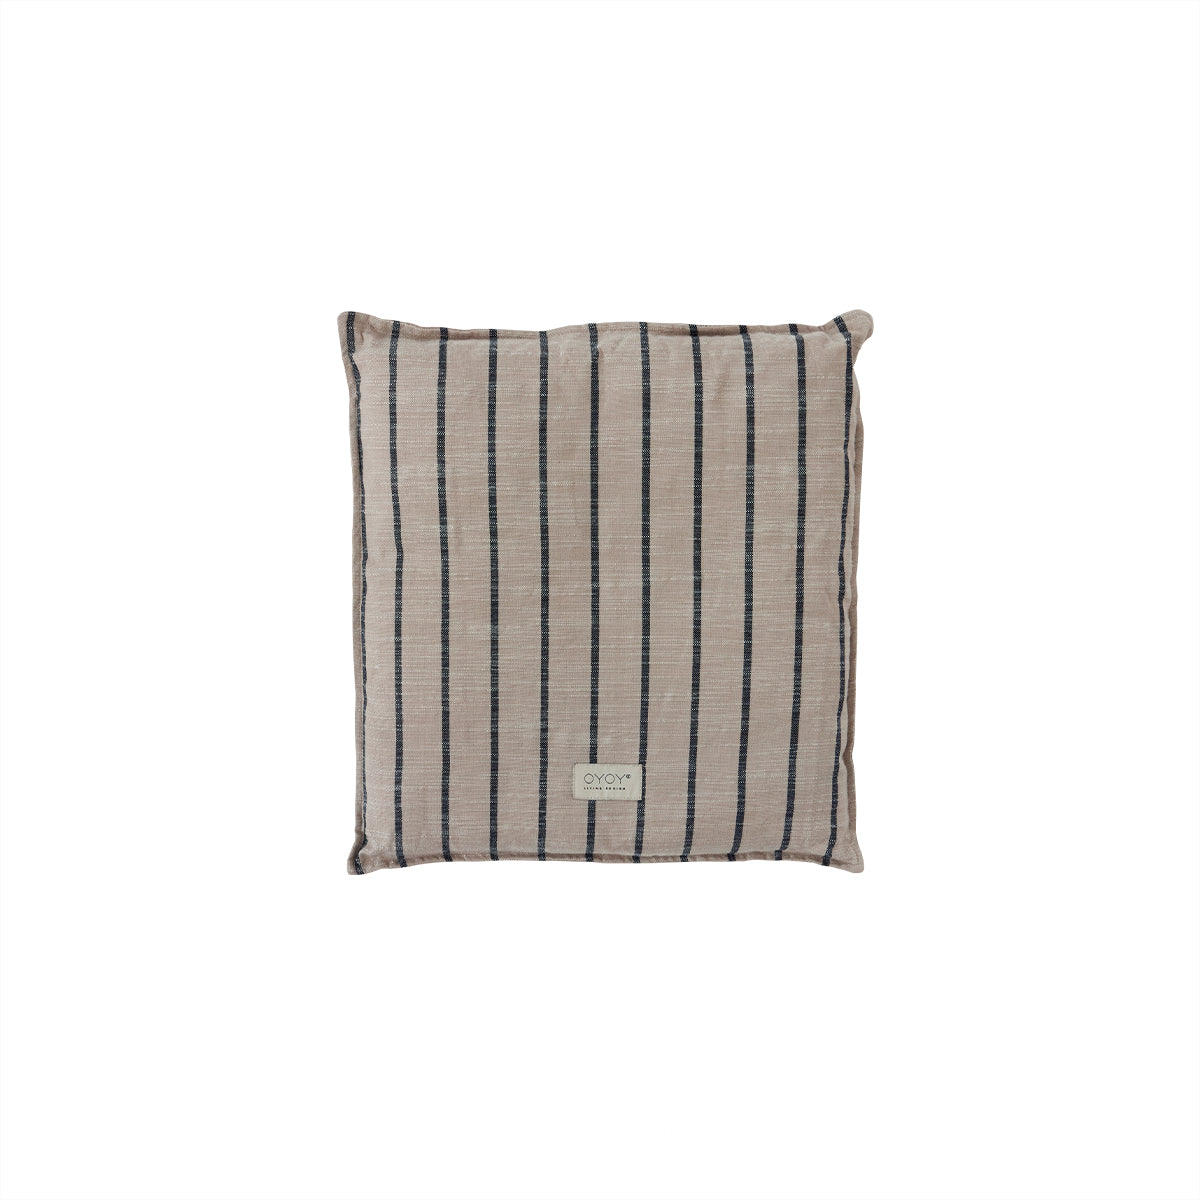 OYOY LIVING Outdoor Kyoto Cushion Square Seat Cushion 306 Clay